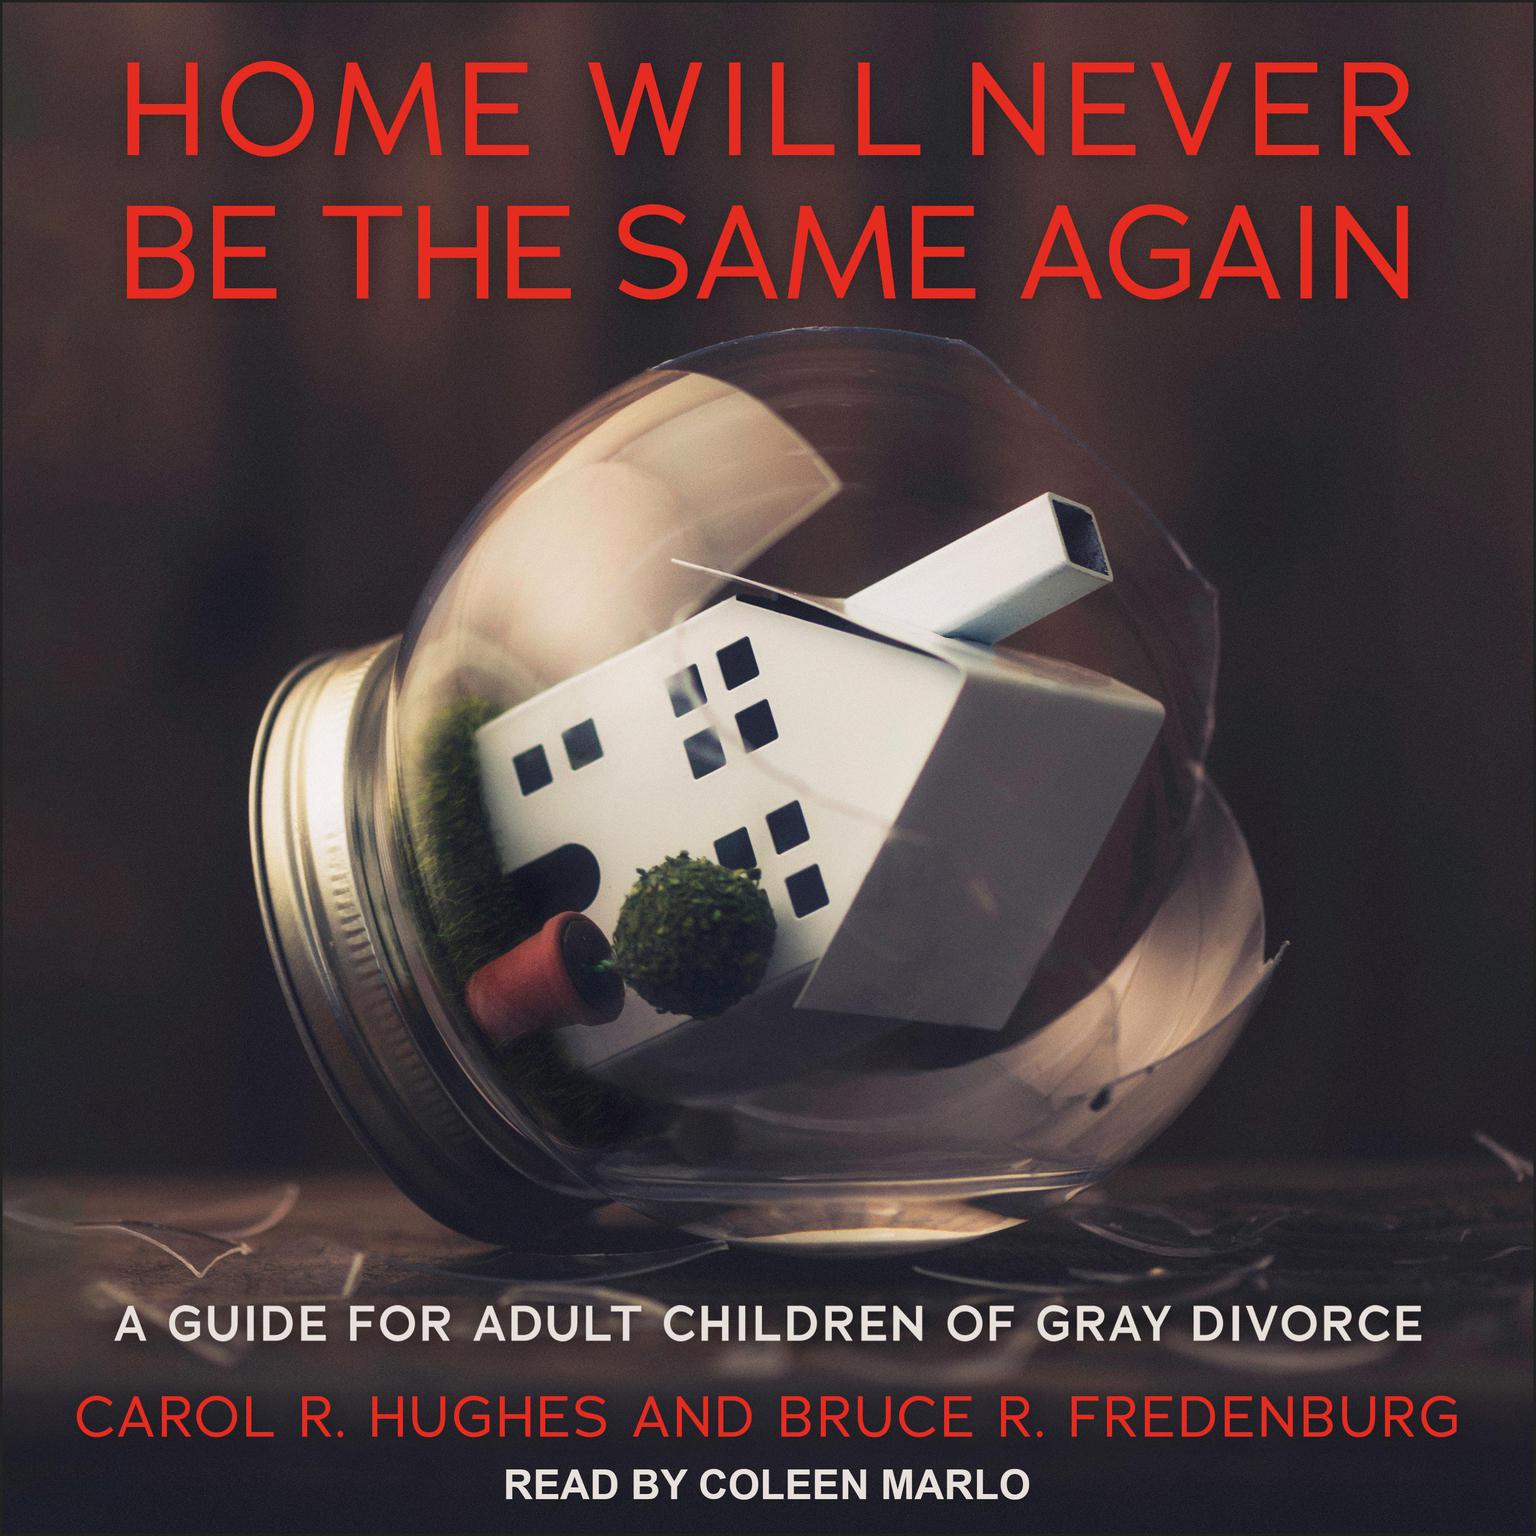 Home Will Never Be the Same Again: A Guide for Adult Children of Gray Divorce Audiobook, by Carol R. Hughes